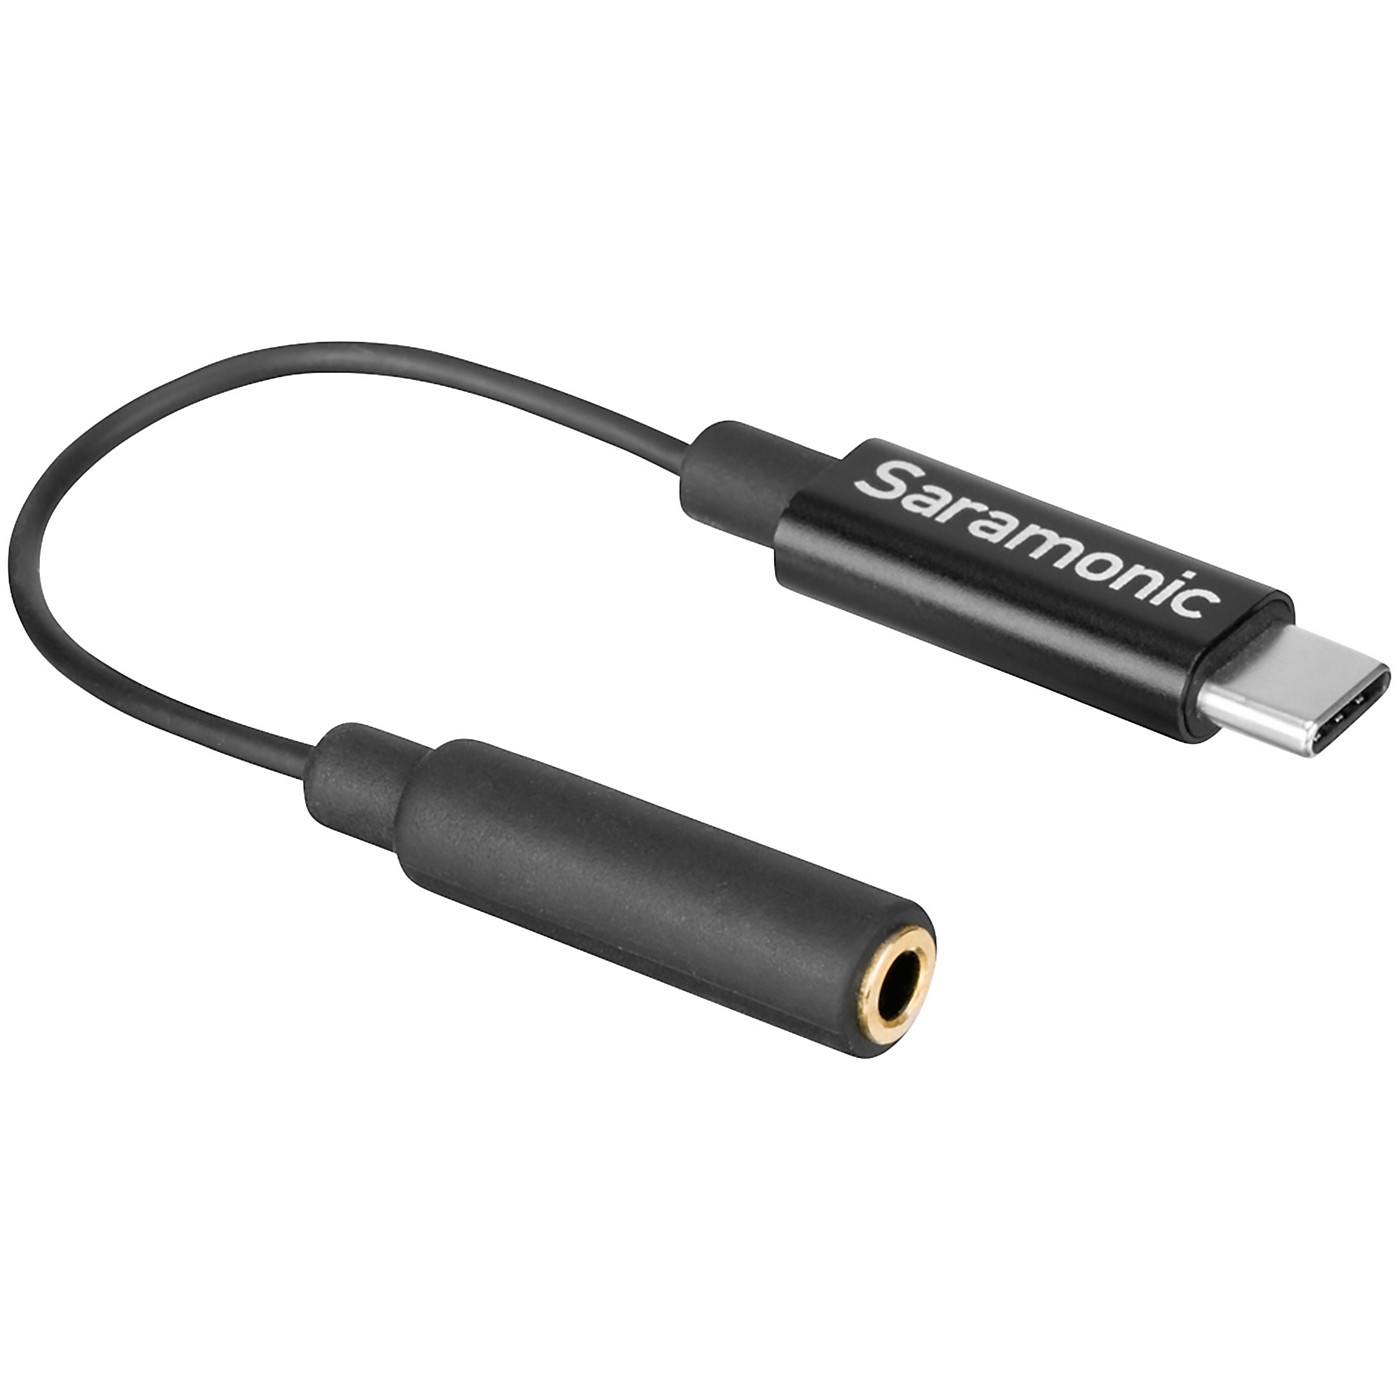 Saramonic SR-C2003 Short USB Type-C Male to Gold-Plated Female 3.5mm TRS Adapter Cable thumbnail